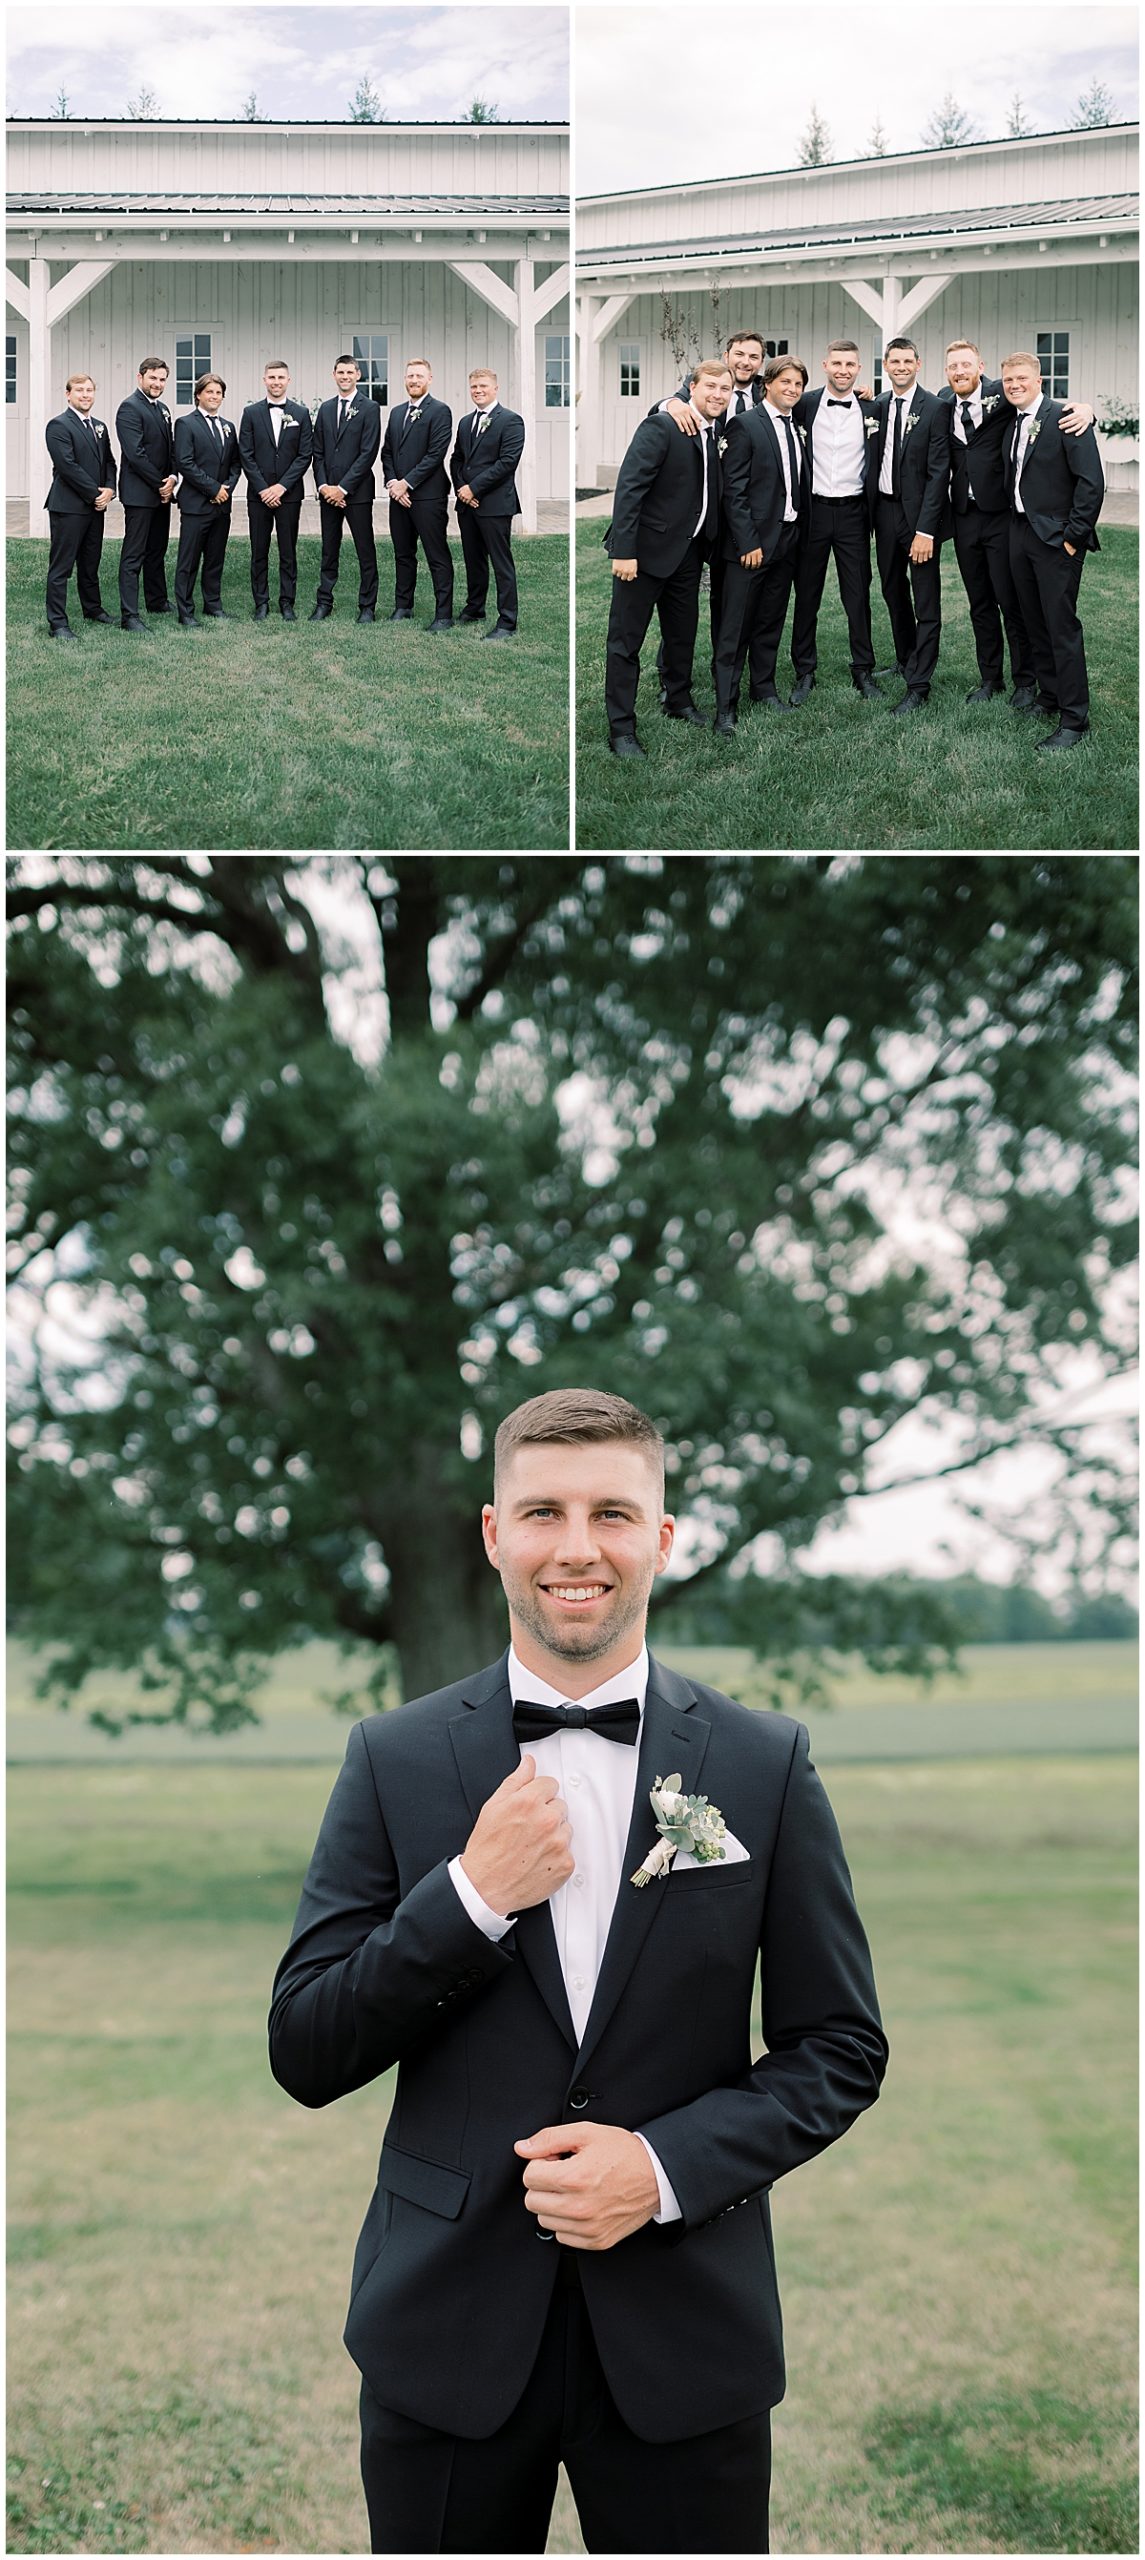 groom and groomsmen wearing black suits and bow ties at the white barn wedding venue 